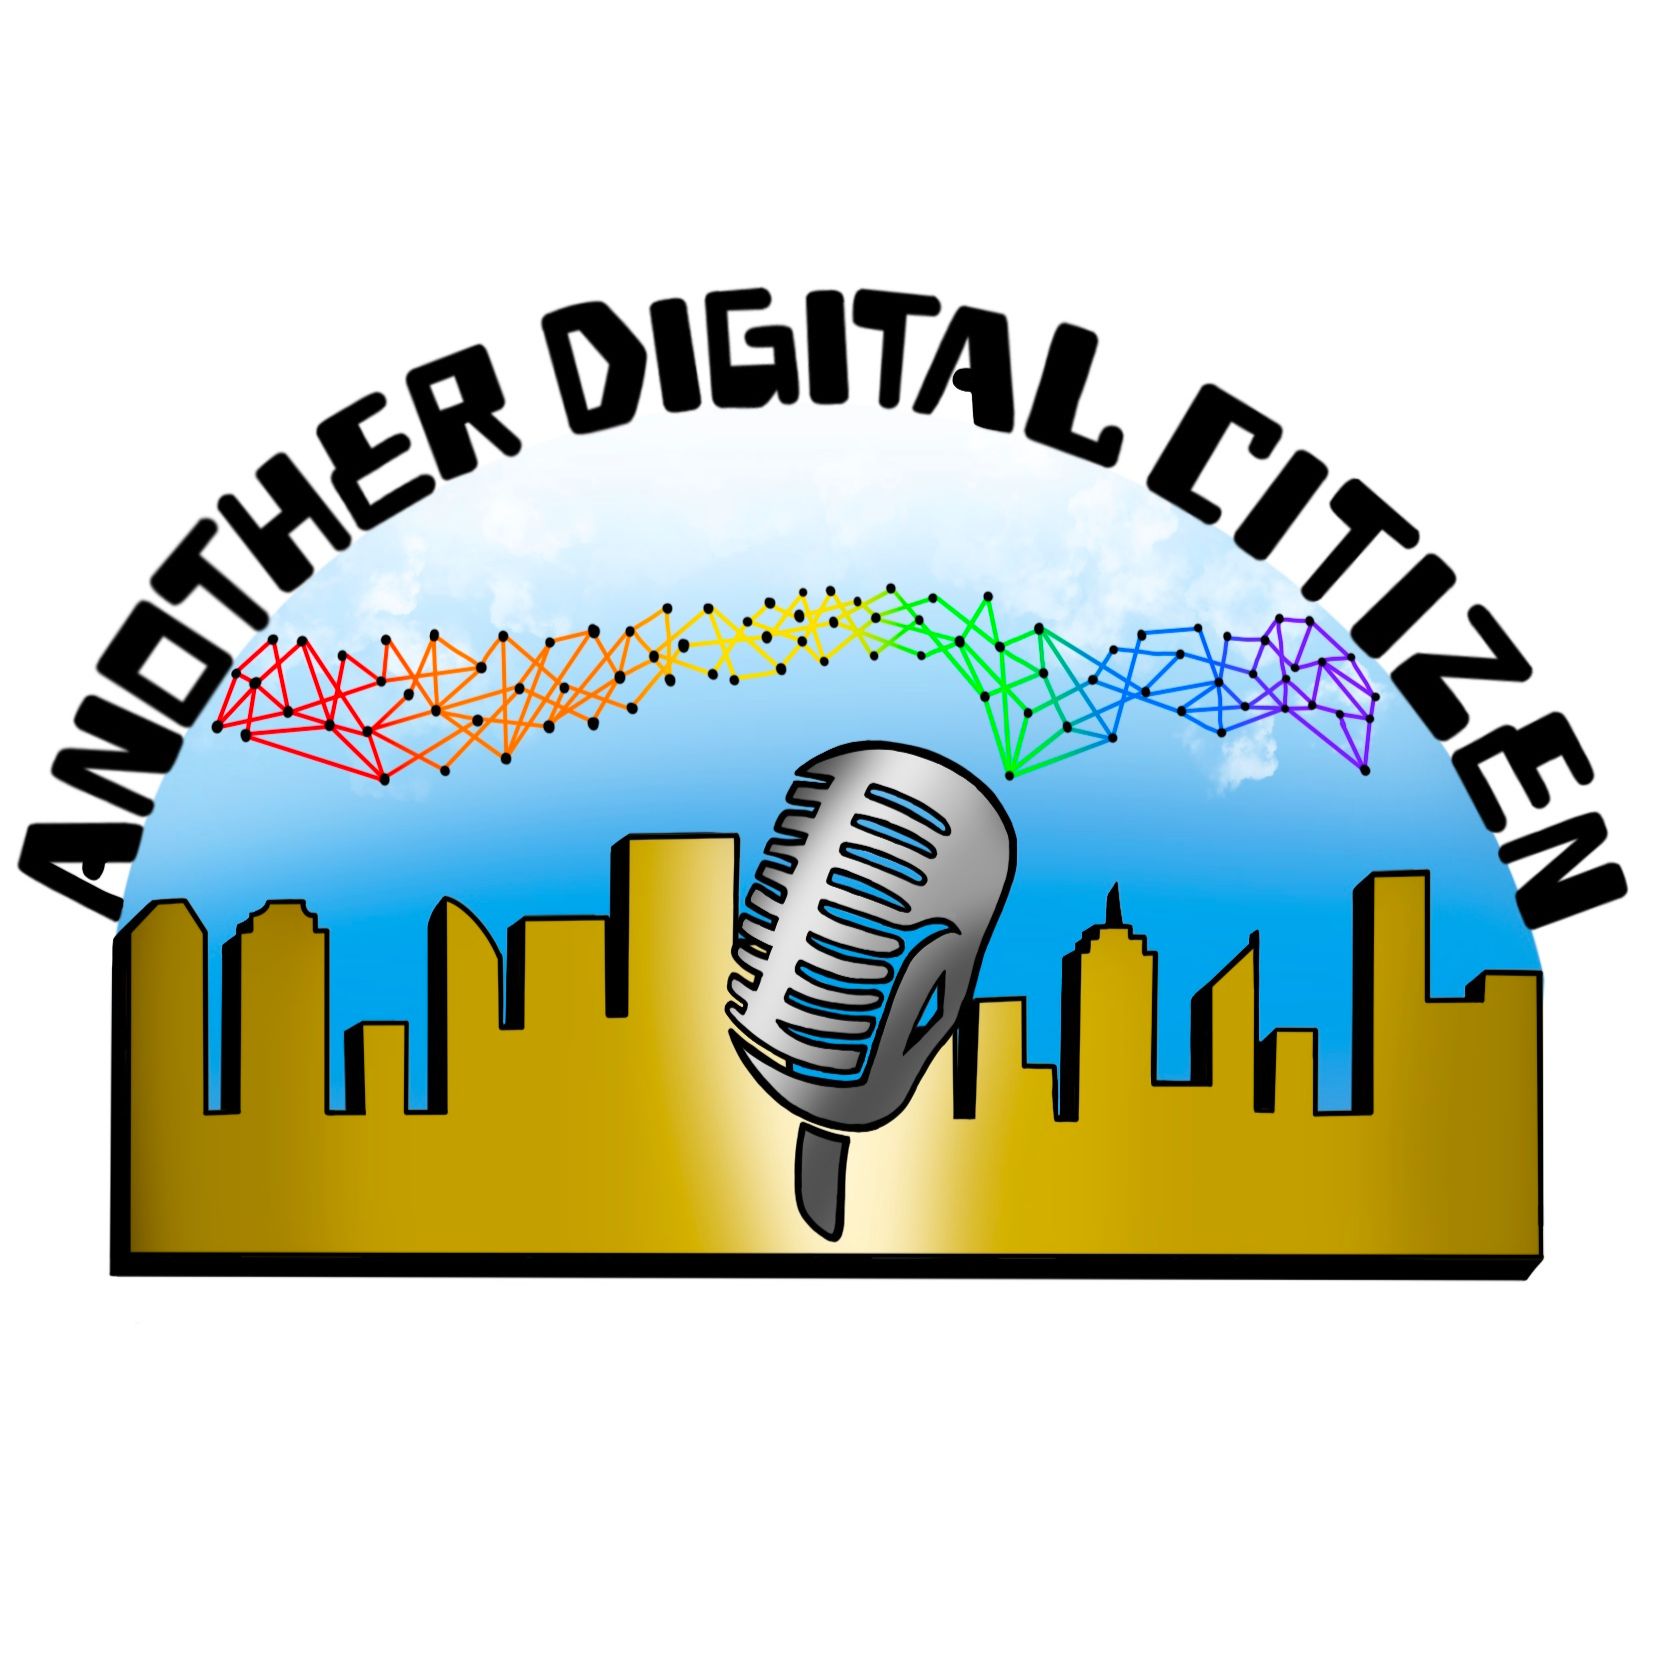 ANOTHER DIGITAL CITIZEN Episode 444- F Girl Protests Island’s Baby Reindeer